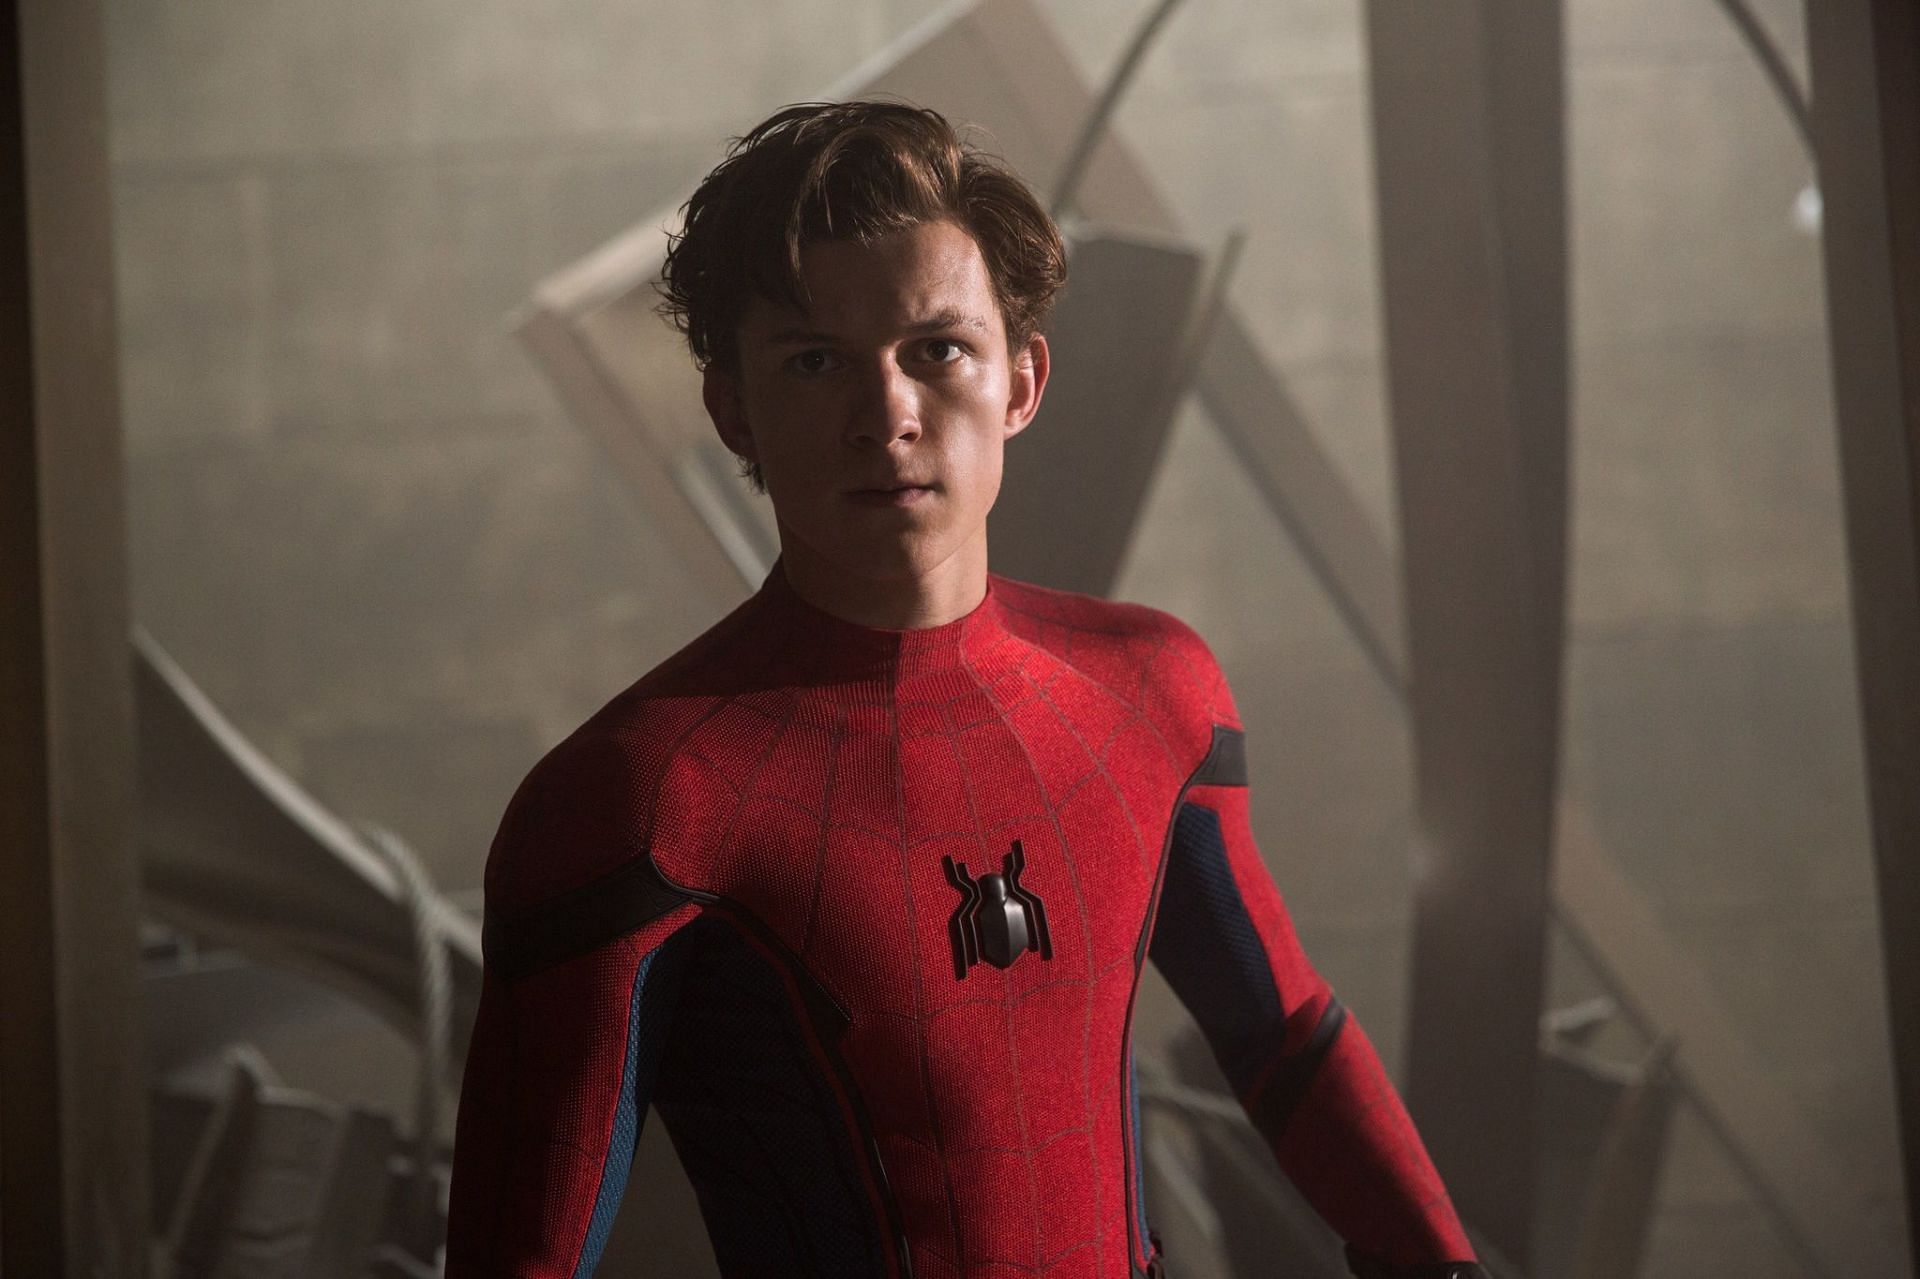 Tom Holland&#039;s portrayal of Spider-Man brought a refreshing and relatable character to the MCU (Image via Marvel Studios)